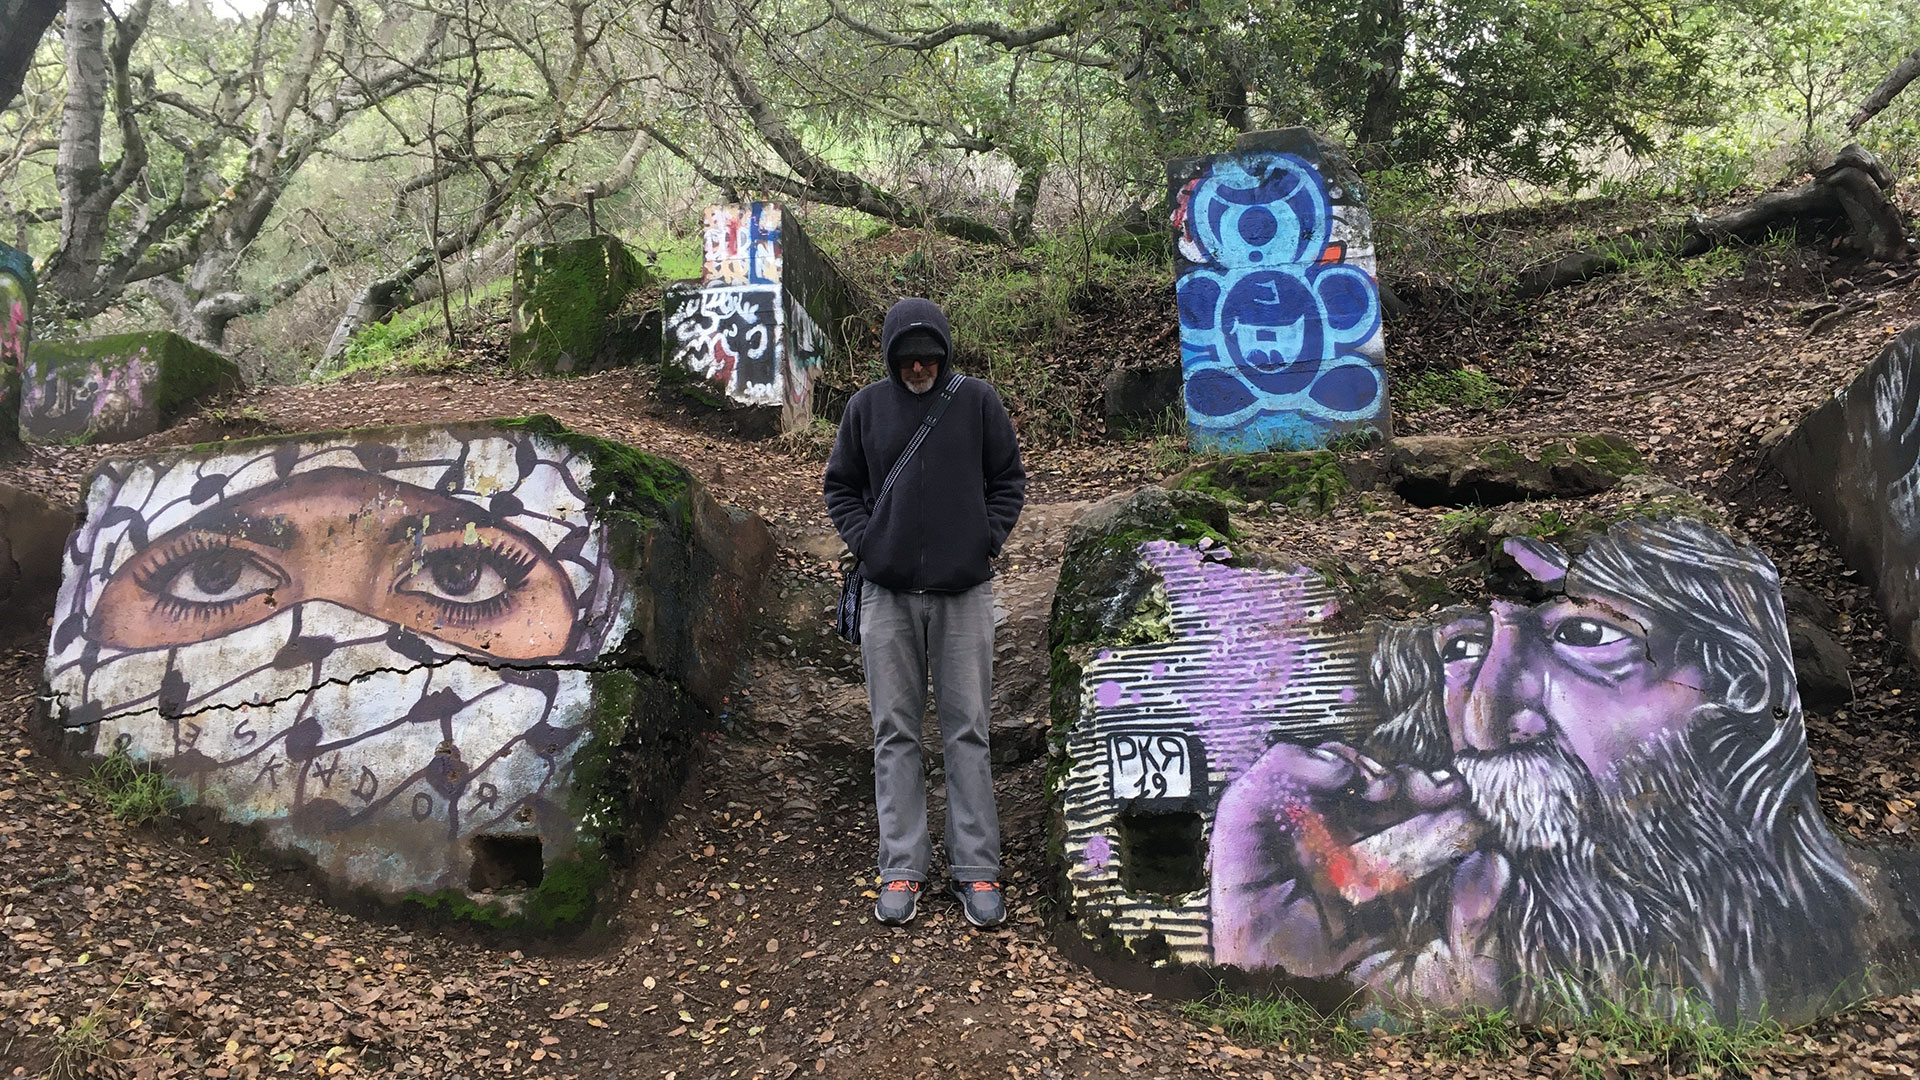 A man in black hoodie stands center, around him are remnants of concrete walls painted with vibrant art.